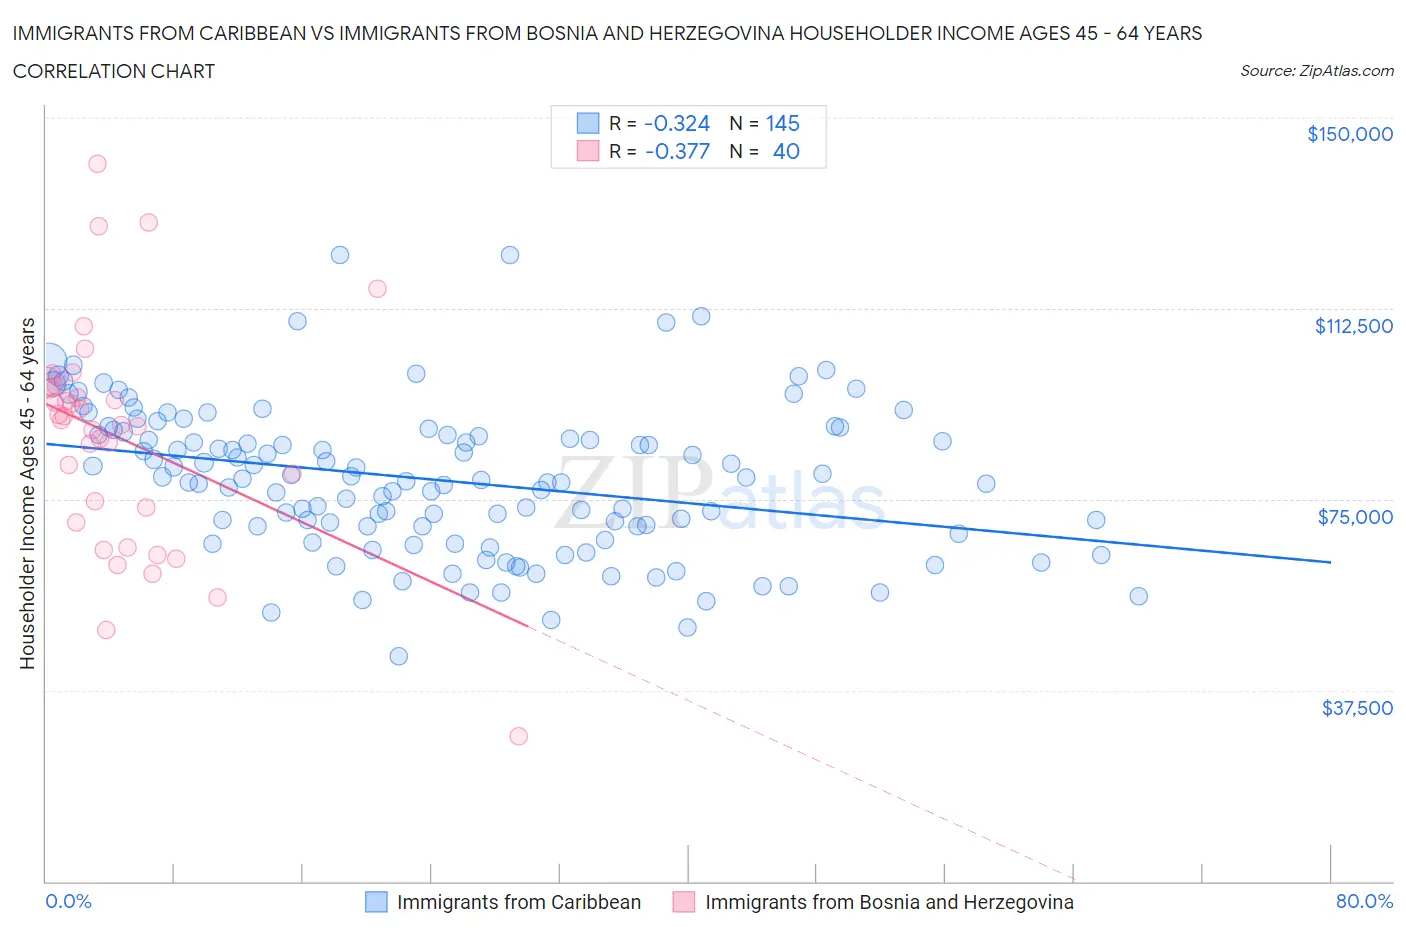 Immigrants from Caribbean vs Immigrants from Bosnia and Herzegovina Householder Income Ages 45 - 64 years